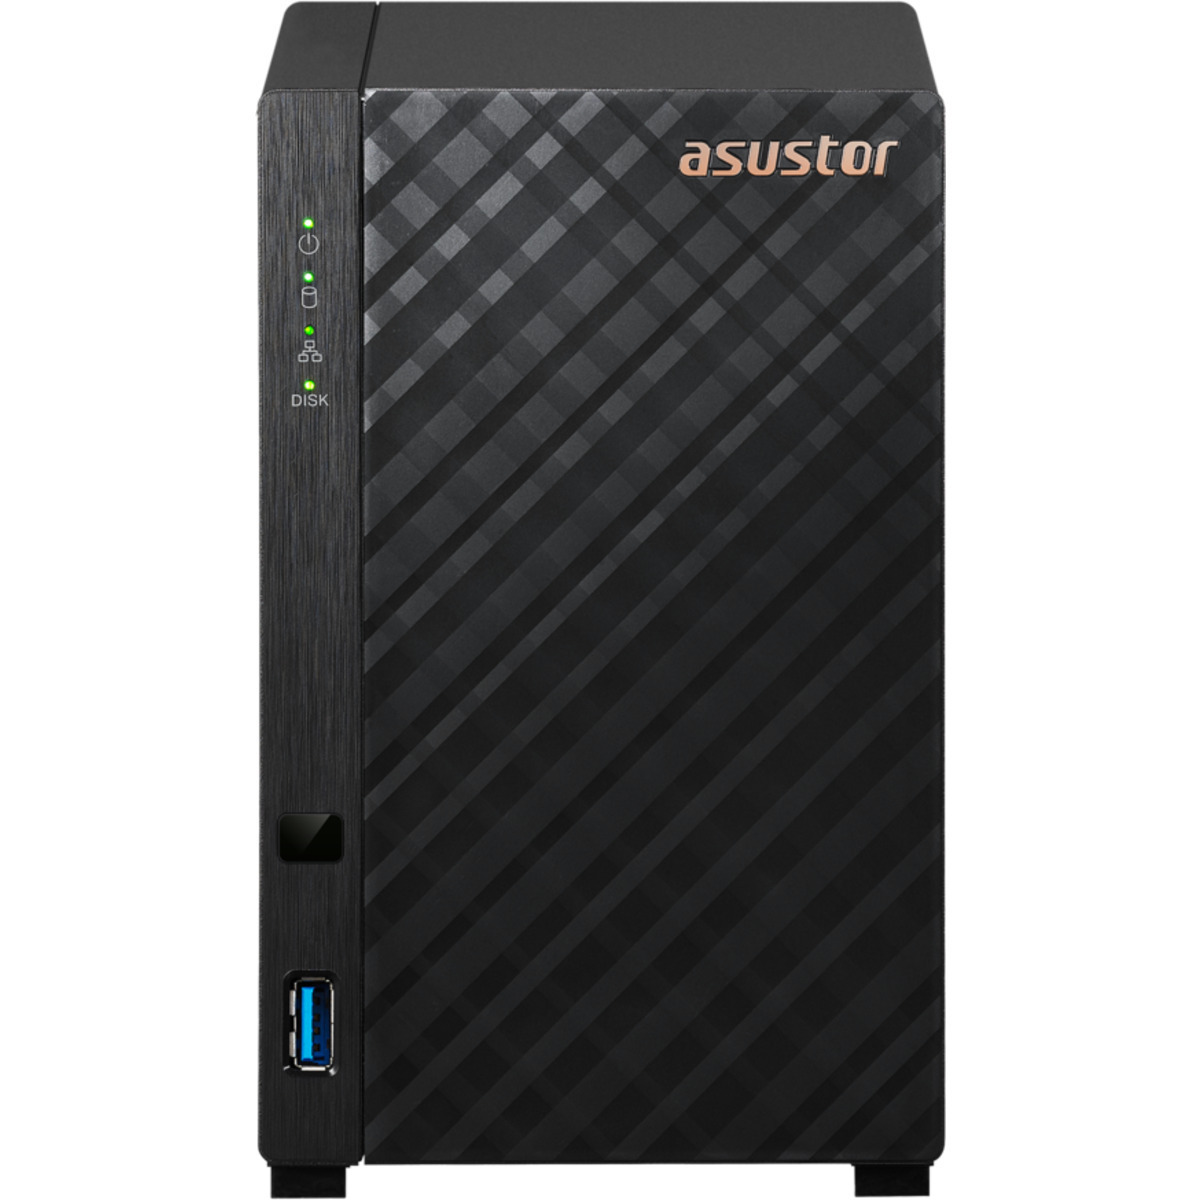 ASUSTOR DRIVESTOR 2 Lite AS1102TL 16tb 2-Bay Desktop Personal / Basic Home / Small Office NAS - Network Attached Storage Device 2x8tb Western Digital Red Pro WD8003FFBX 3.5 7200rpm SATA 6Gb/s HDD NAS Class Drives Installed - Burn-In Tested DRIVESTOR 2 Lite AS1102TL